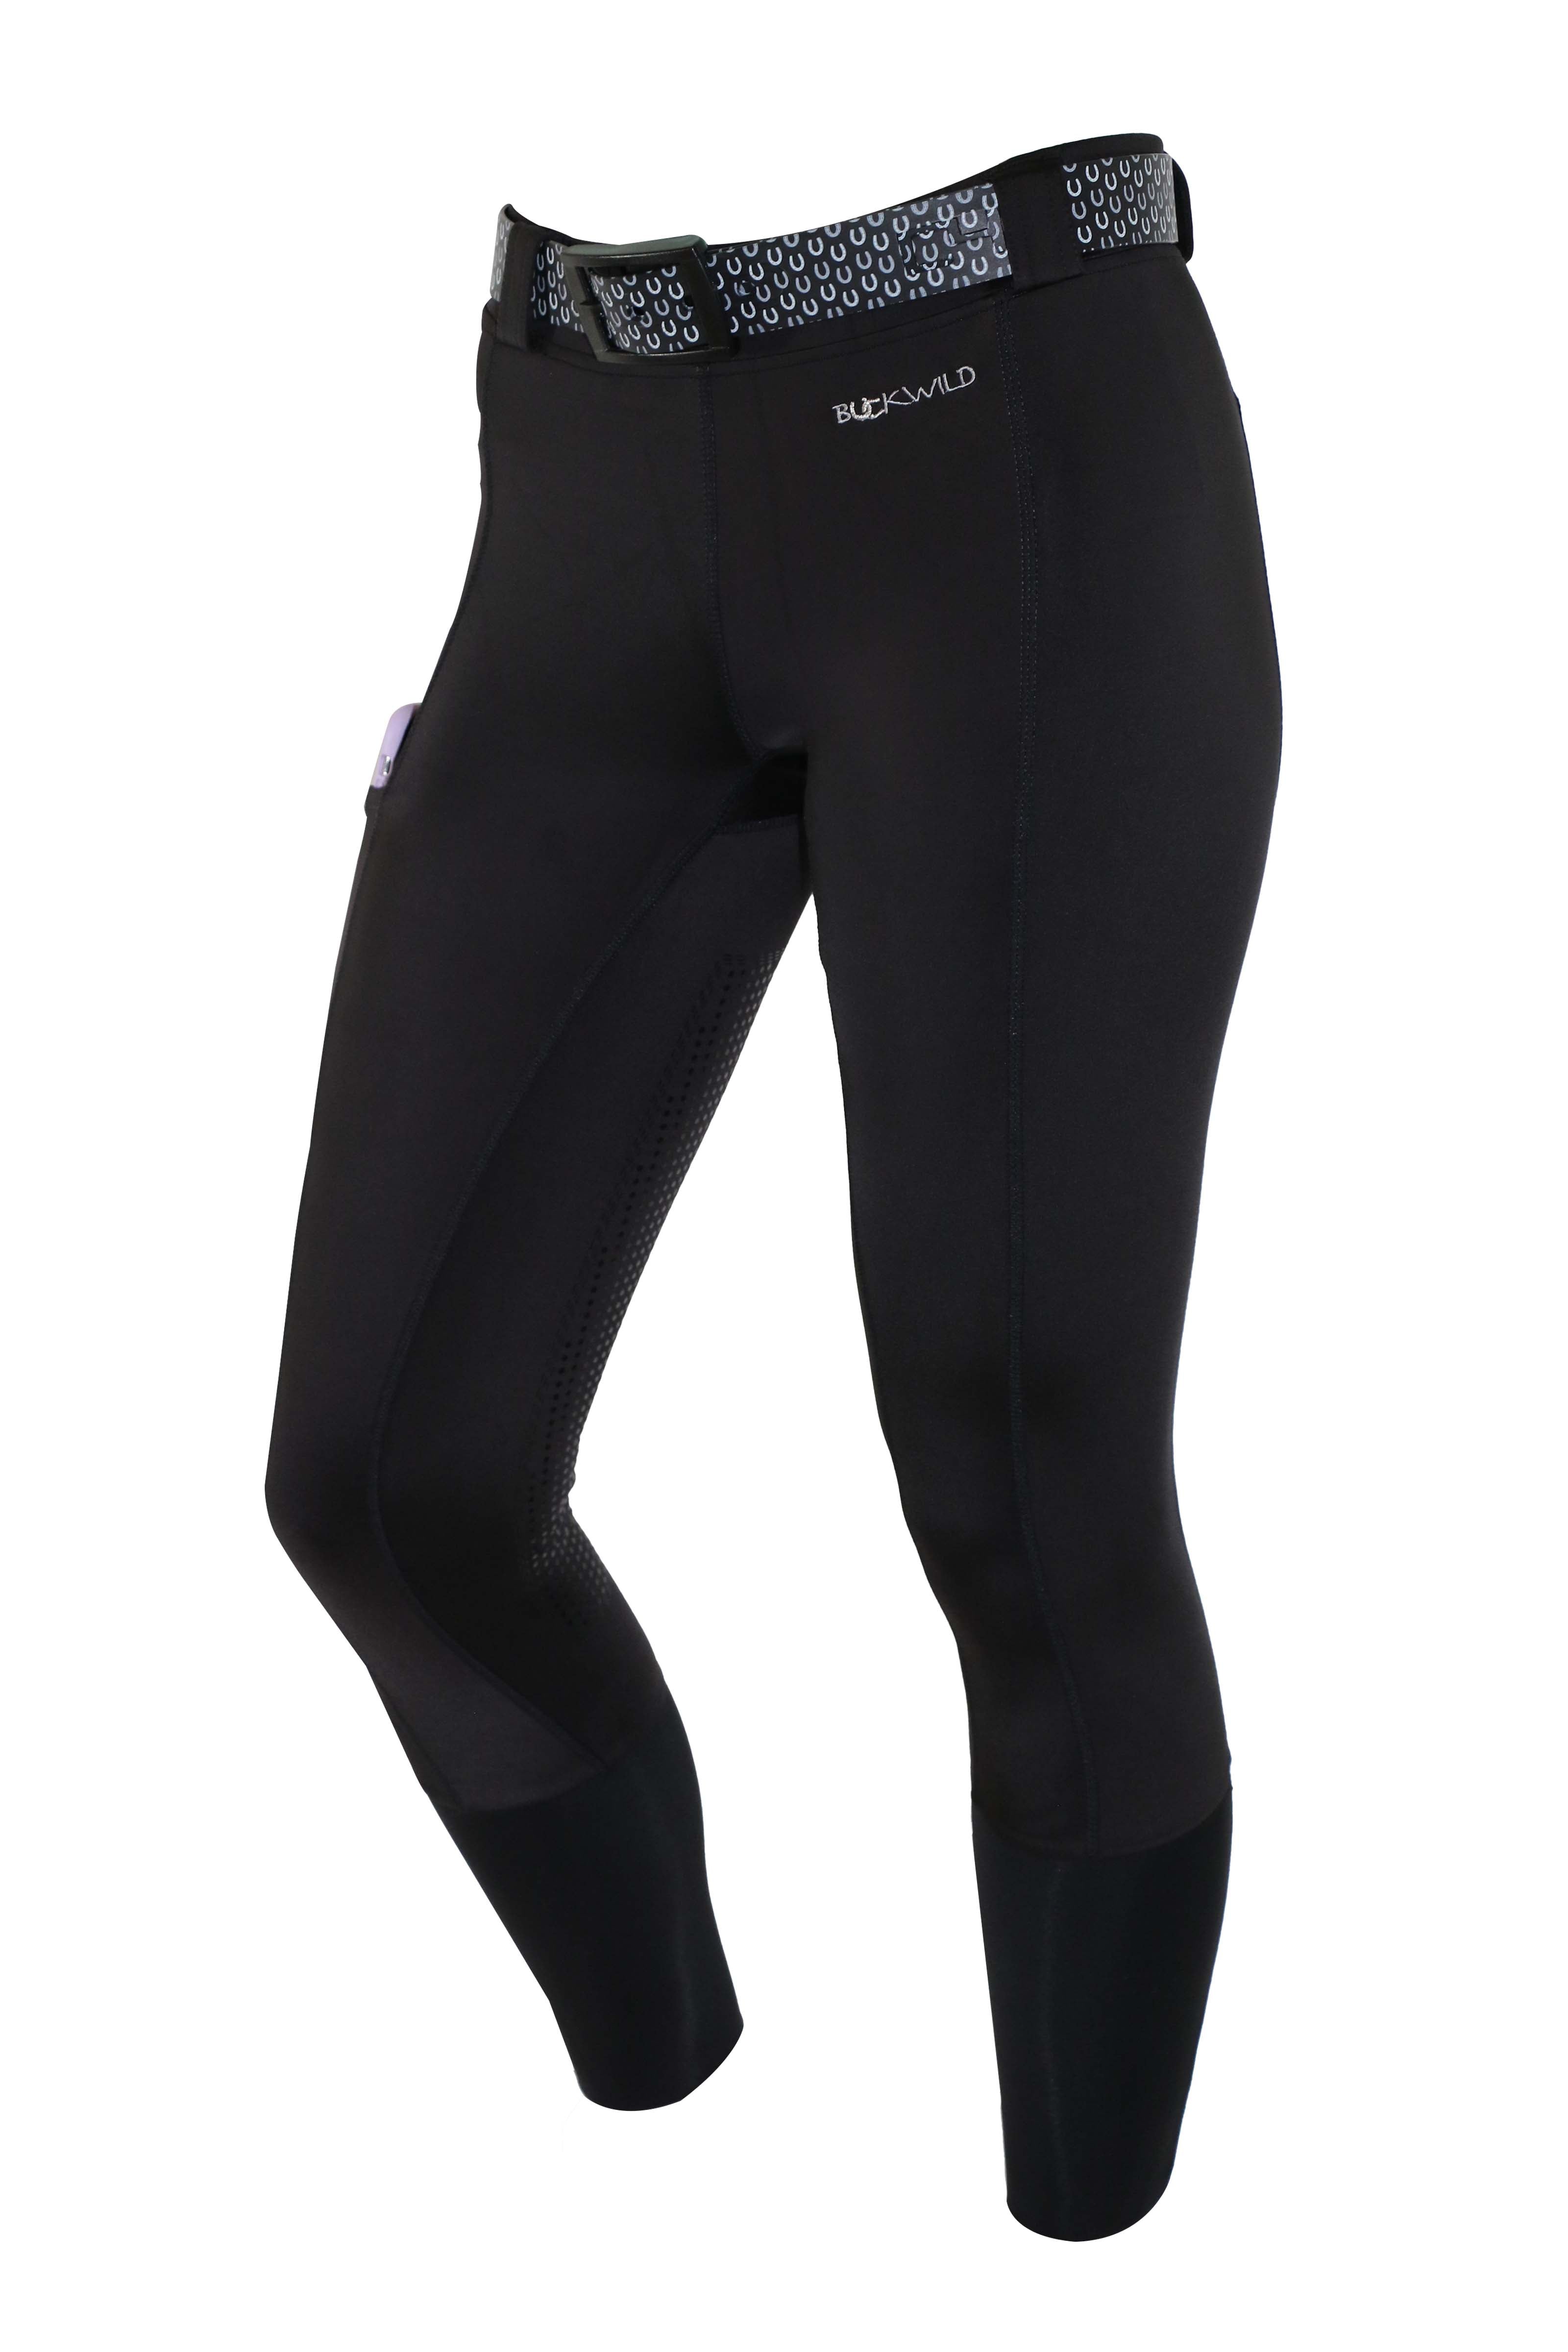 Women's Horse Riding Breeches & Tights - Dover Saddlery